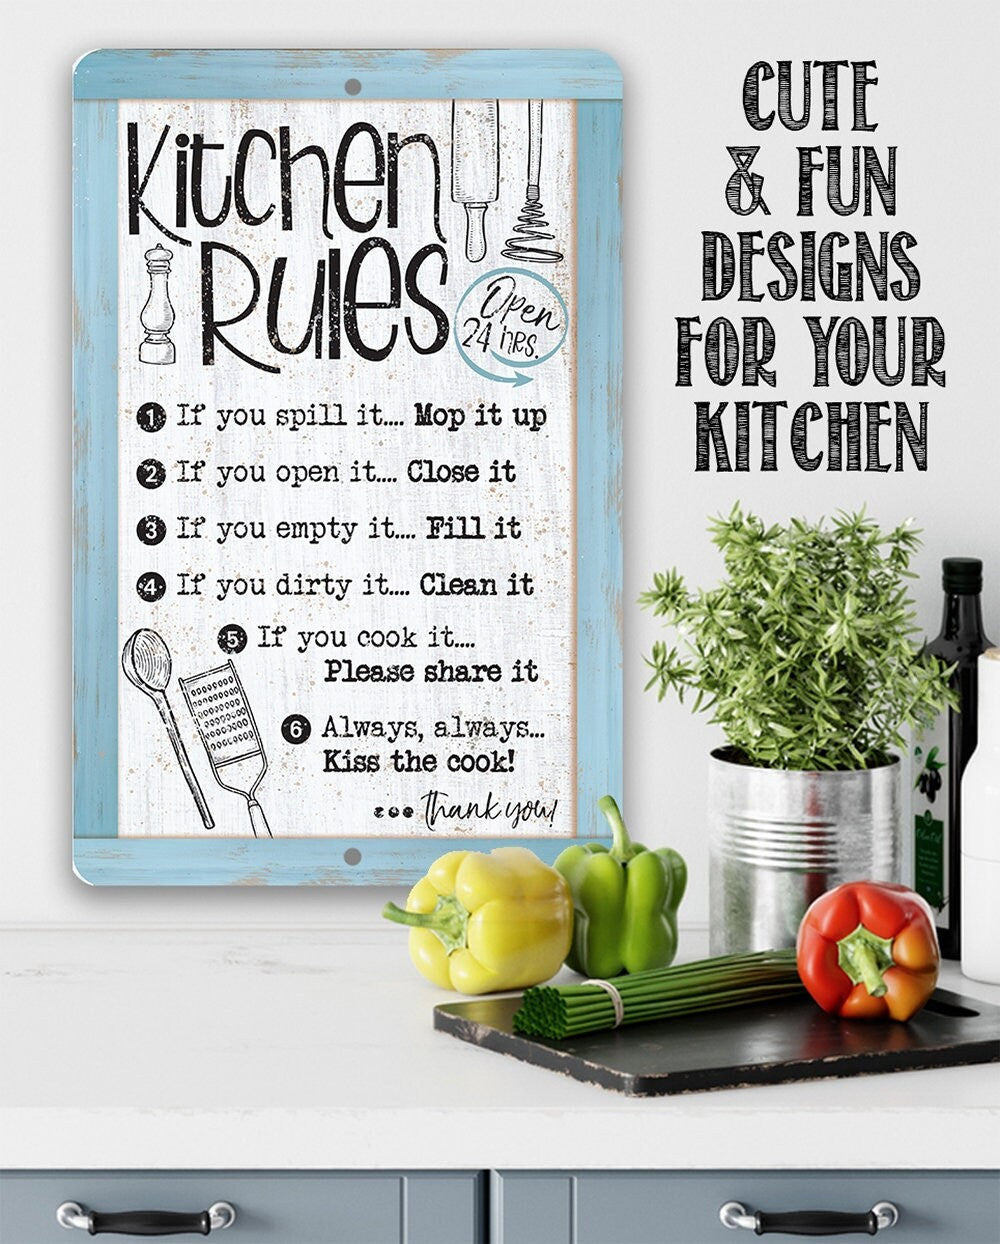 Kitchen Rules, Open 24 Hrs. - Metal Sign Metal Sign Lone Star Art 